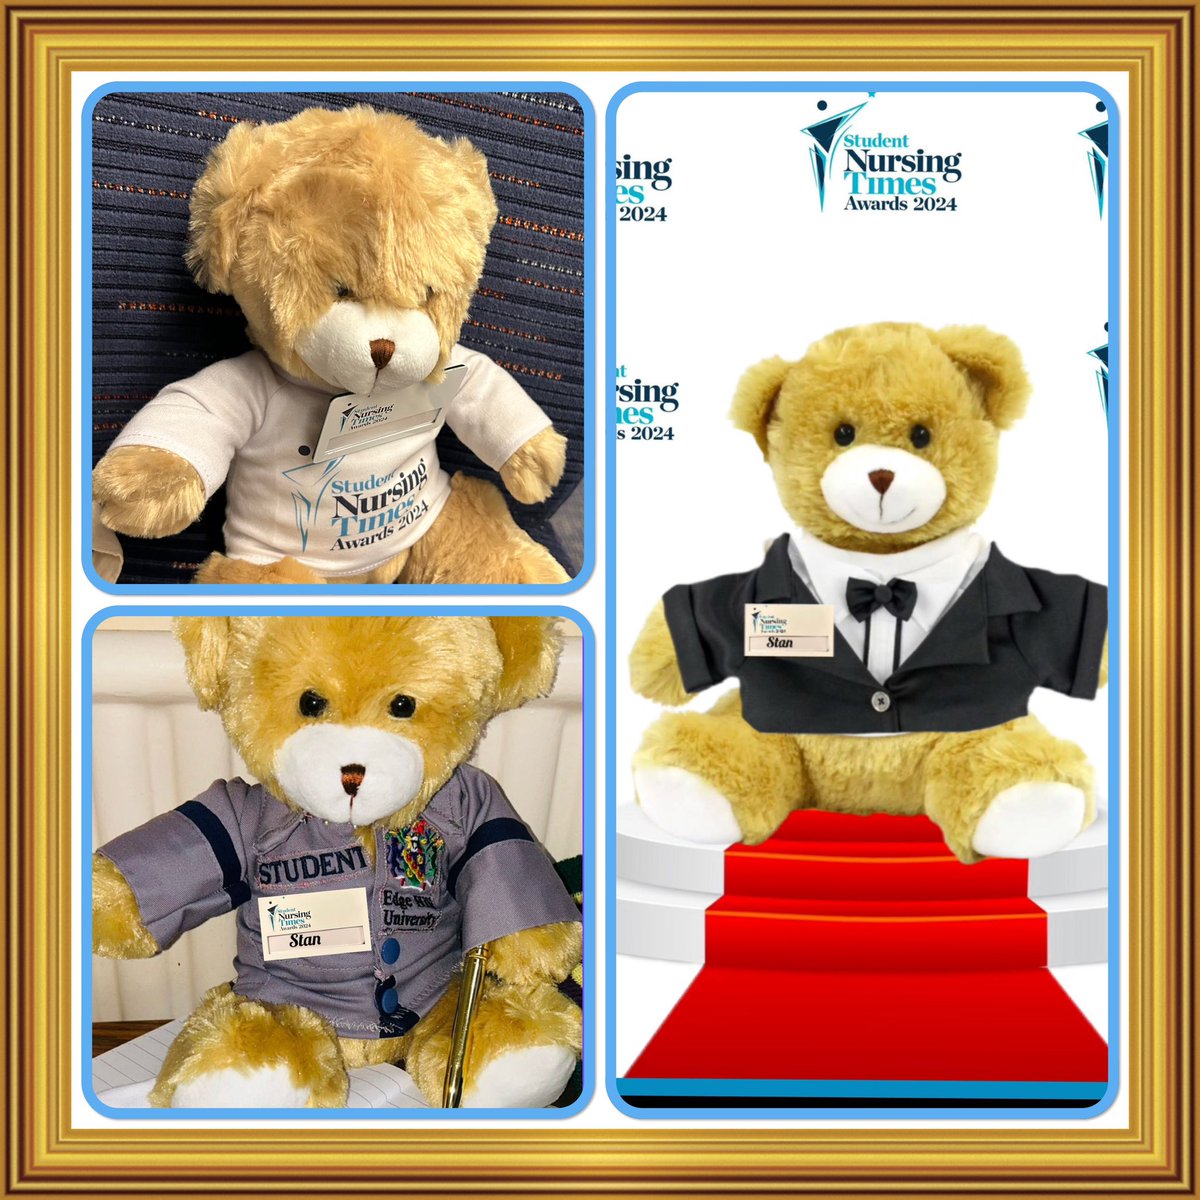 So today Stan is thinking about how far he has come. From being a sad bear sitting alone on a train seat , to being a student nurse and finally dreaming of being on the red carpet at the student nursing times awards @NursingTimes #SNTABear